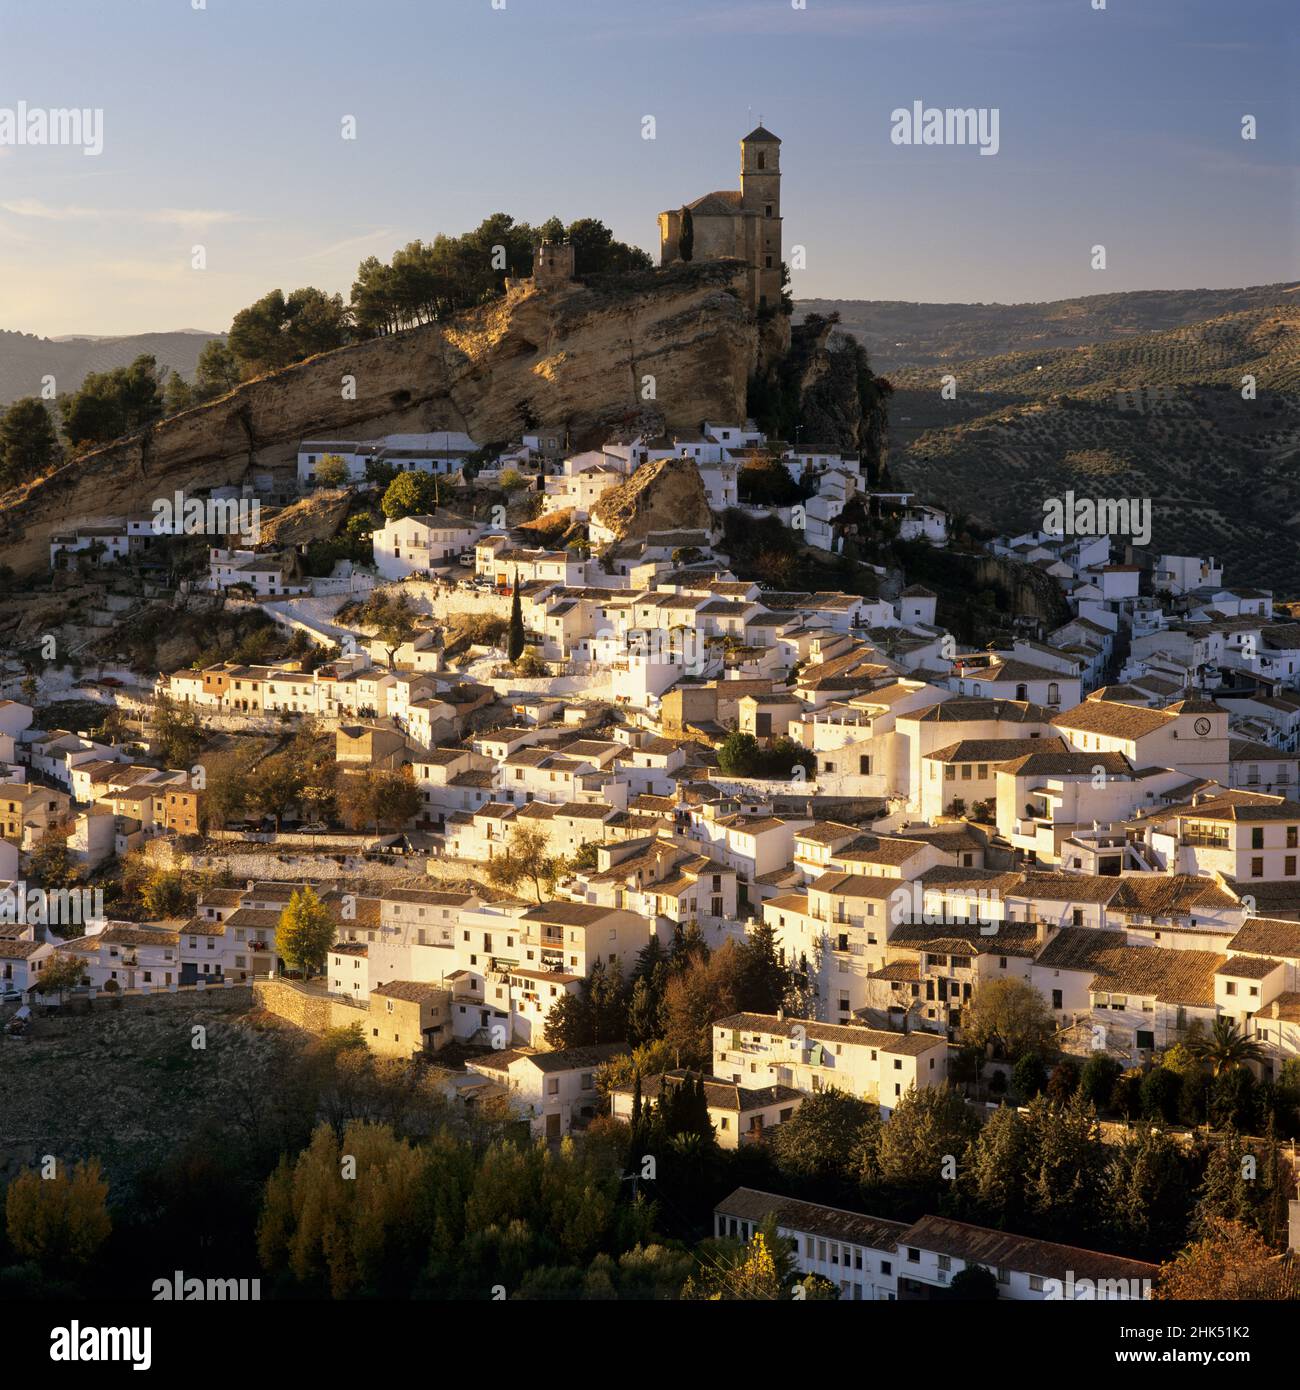 View over the whitewashed houses and old Moorish castle at sunset, Montefrio, Granada Province, Andalucia, Spain, Europe Stock Photo